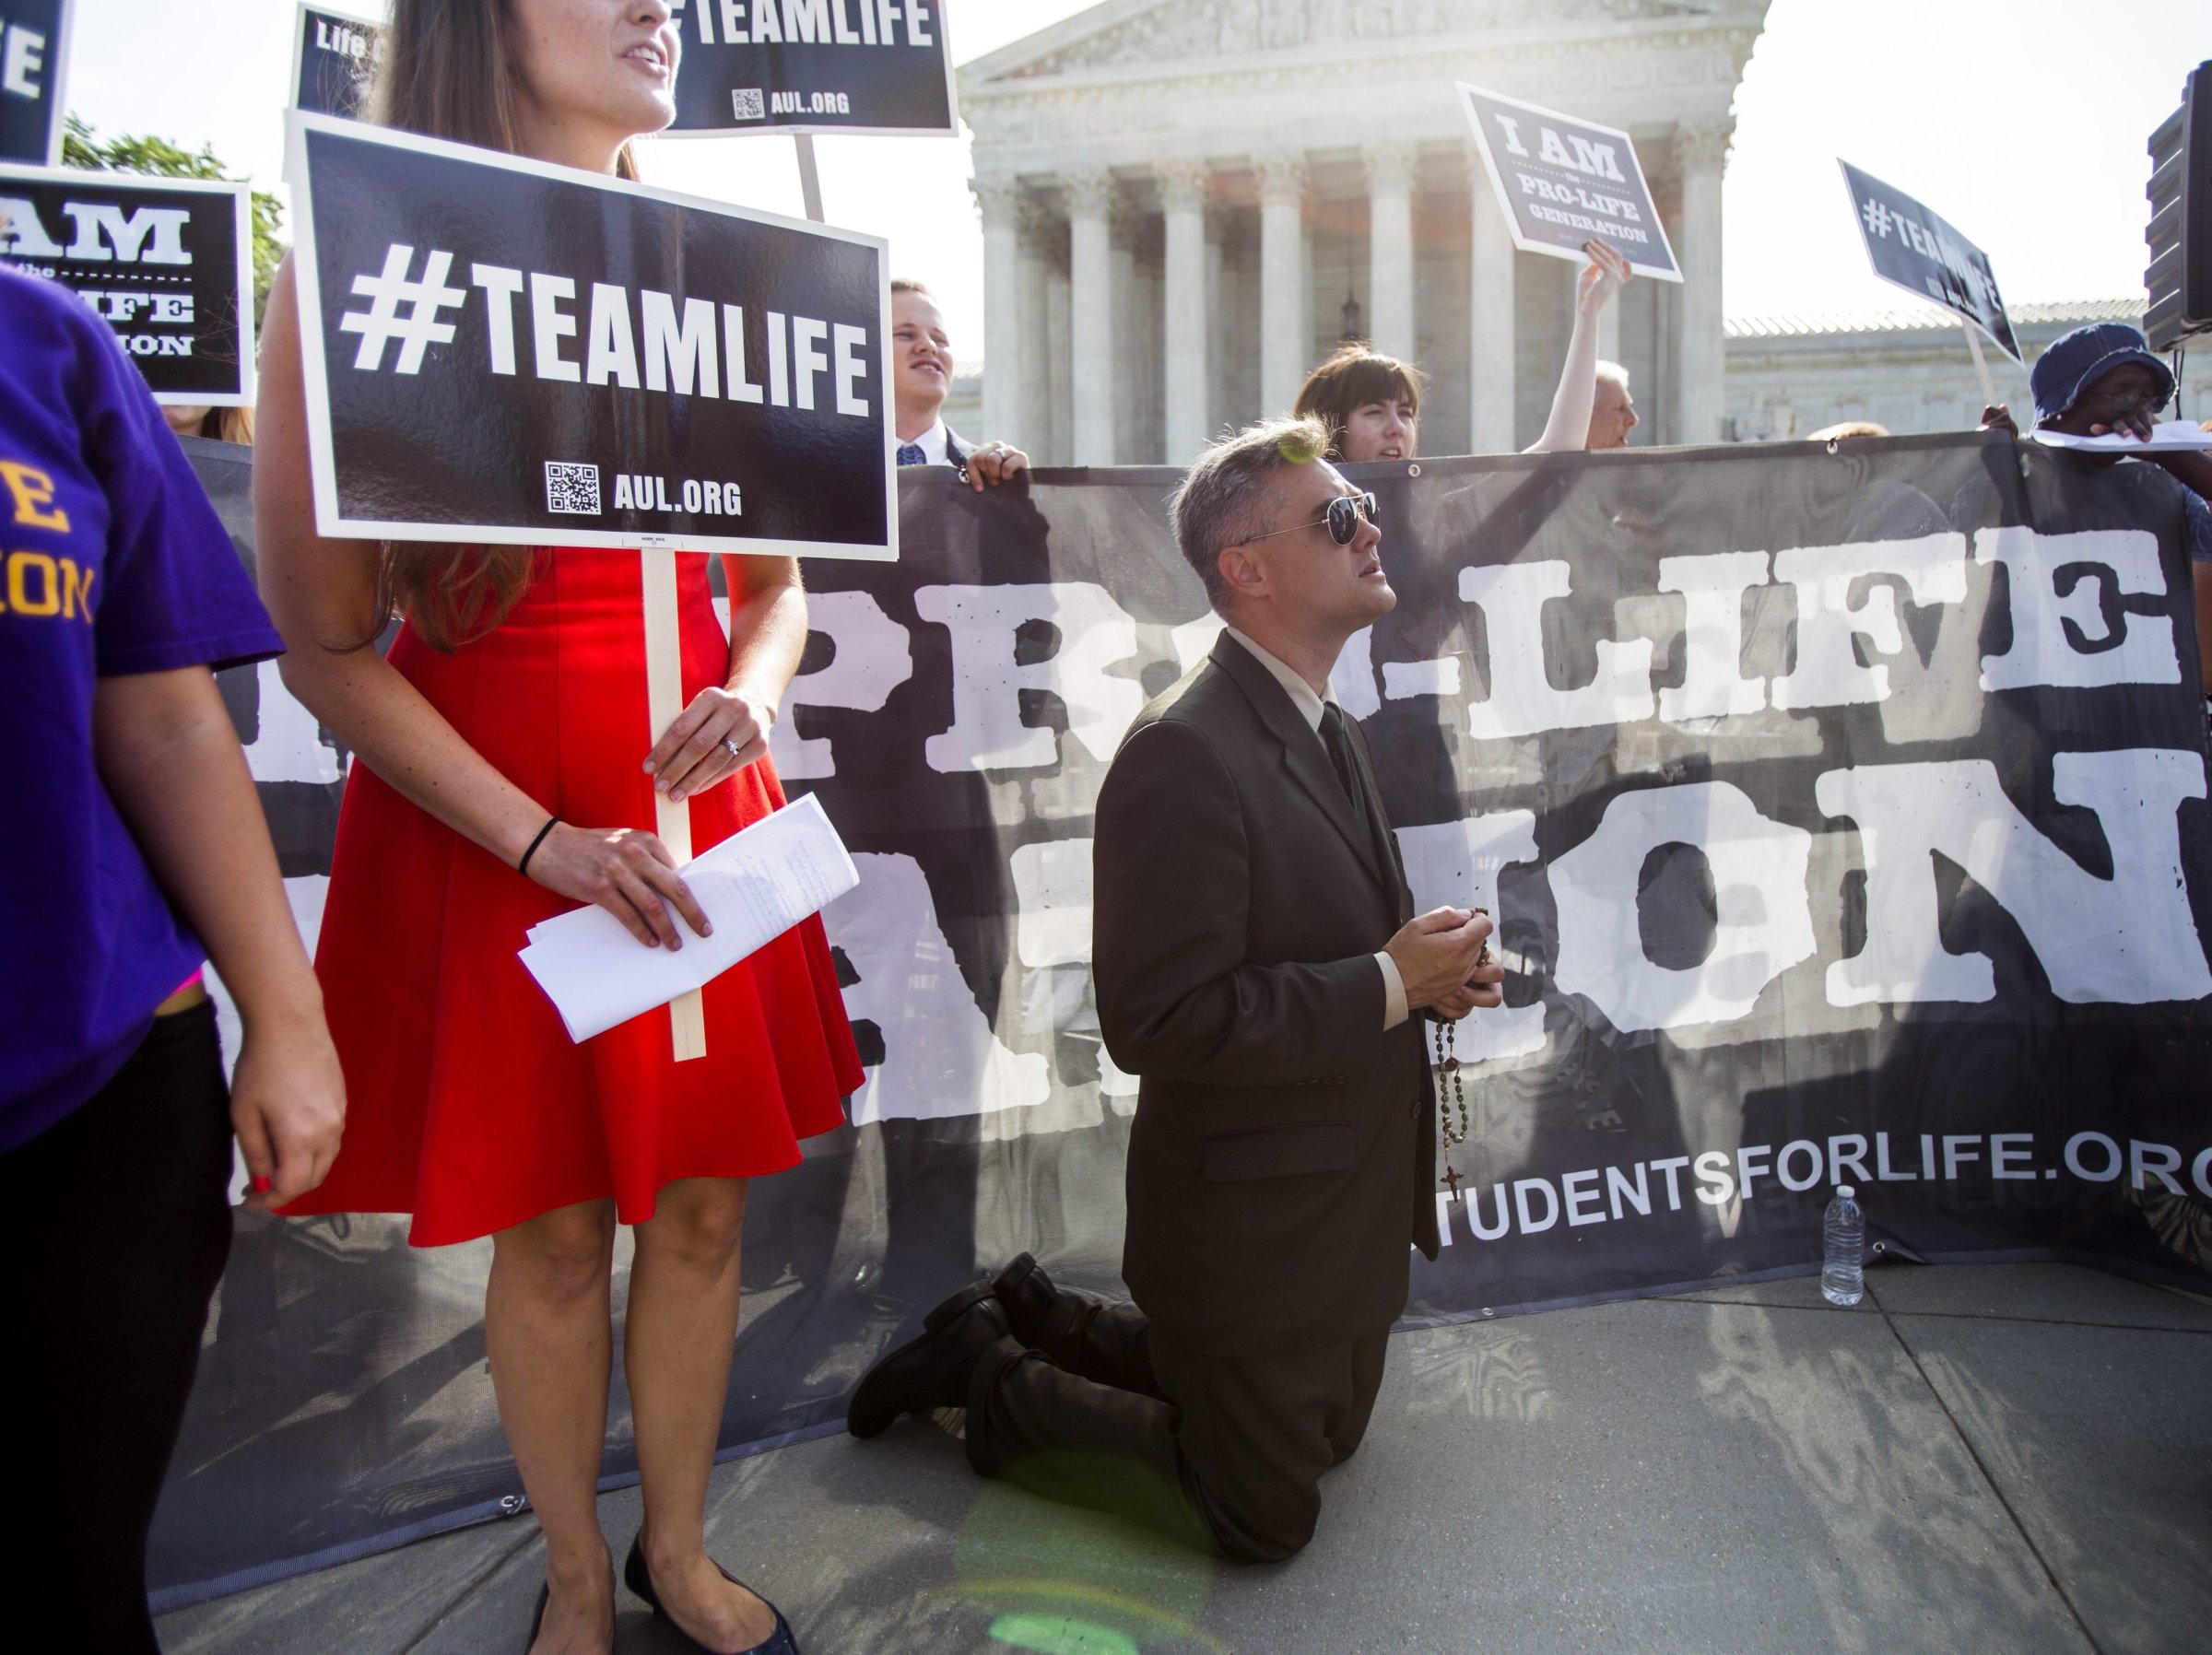 Pro-life supporter Michael Hichborn with American Life League prays outside the US Supreme Court where the nine justices are expected to issue their ruling on the Hobby Lobby case, which challenges the Affordable Care ActÕs mandate that employee health plans include pregnancy preventive services, in Washington on June 30, 2014.